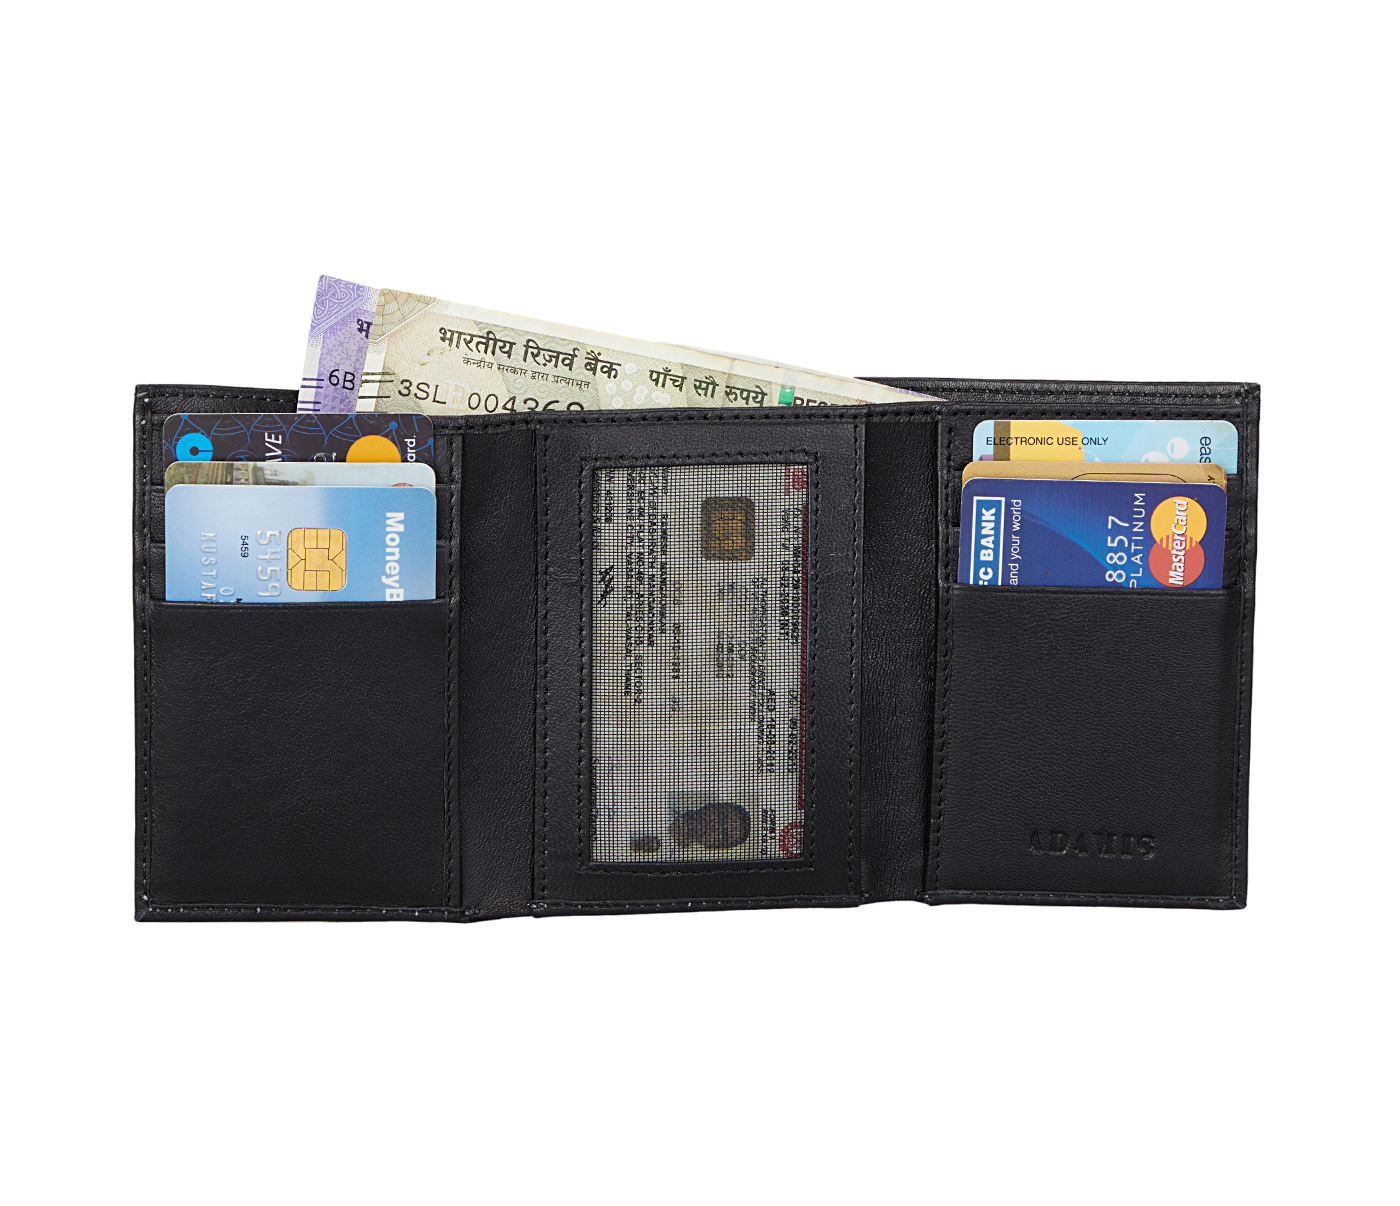 W282-Samuel-Mens's trifold wallet with photo id in Genuine Leather - Black